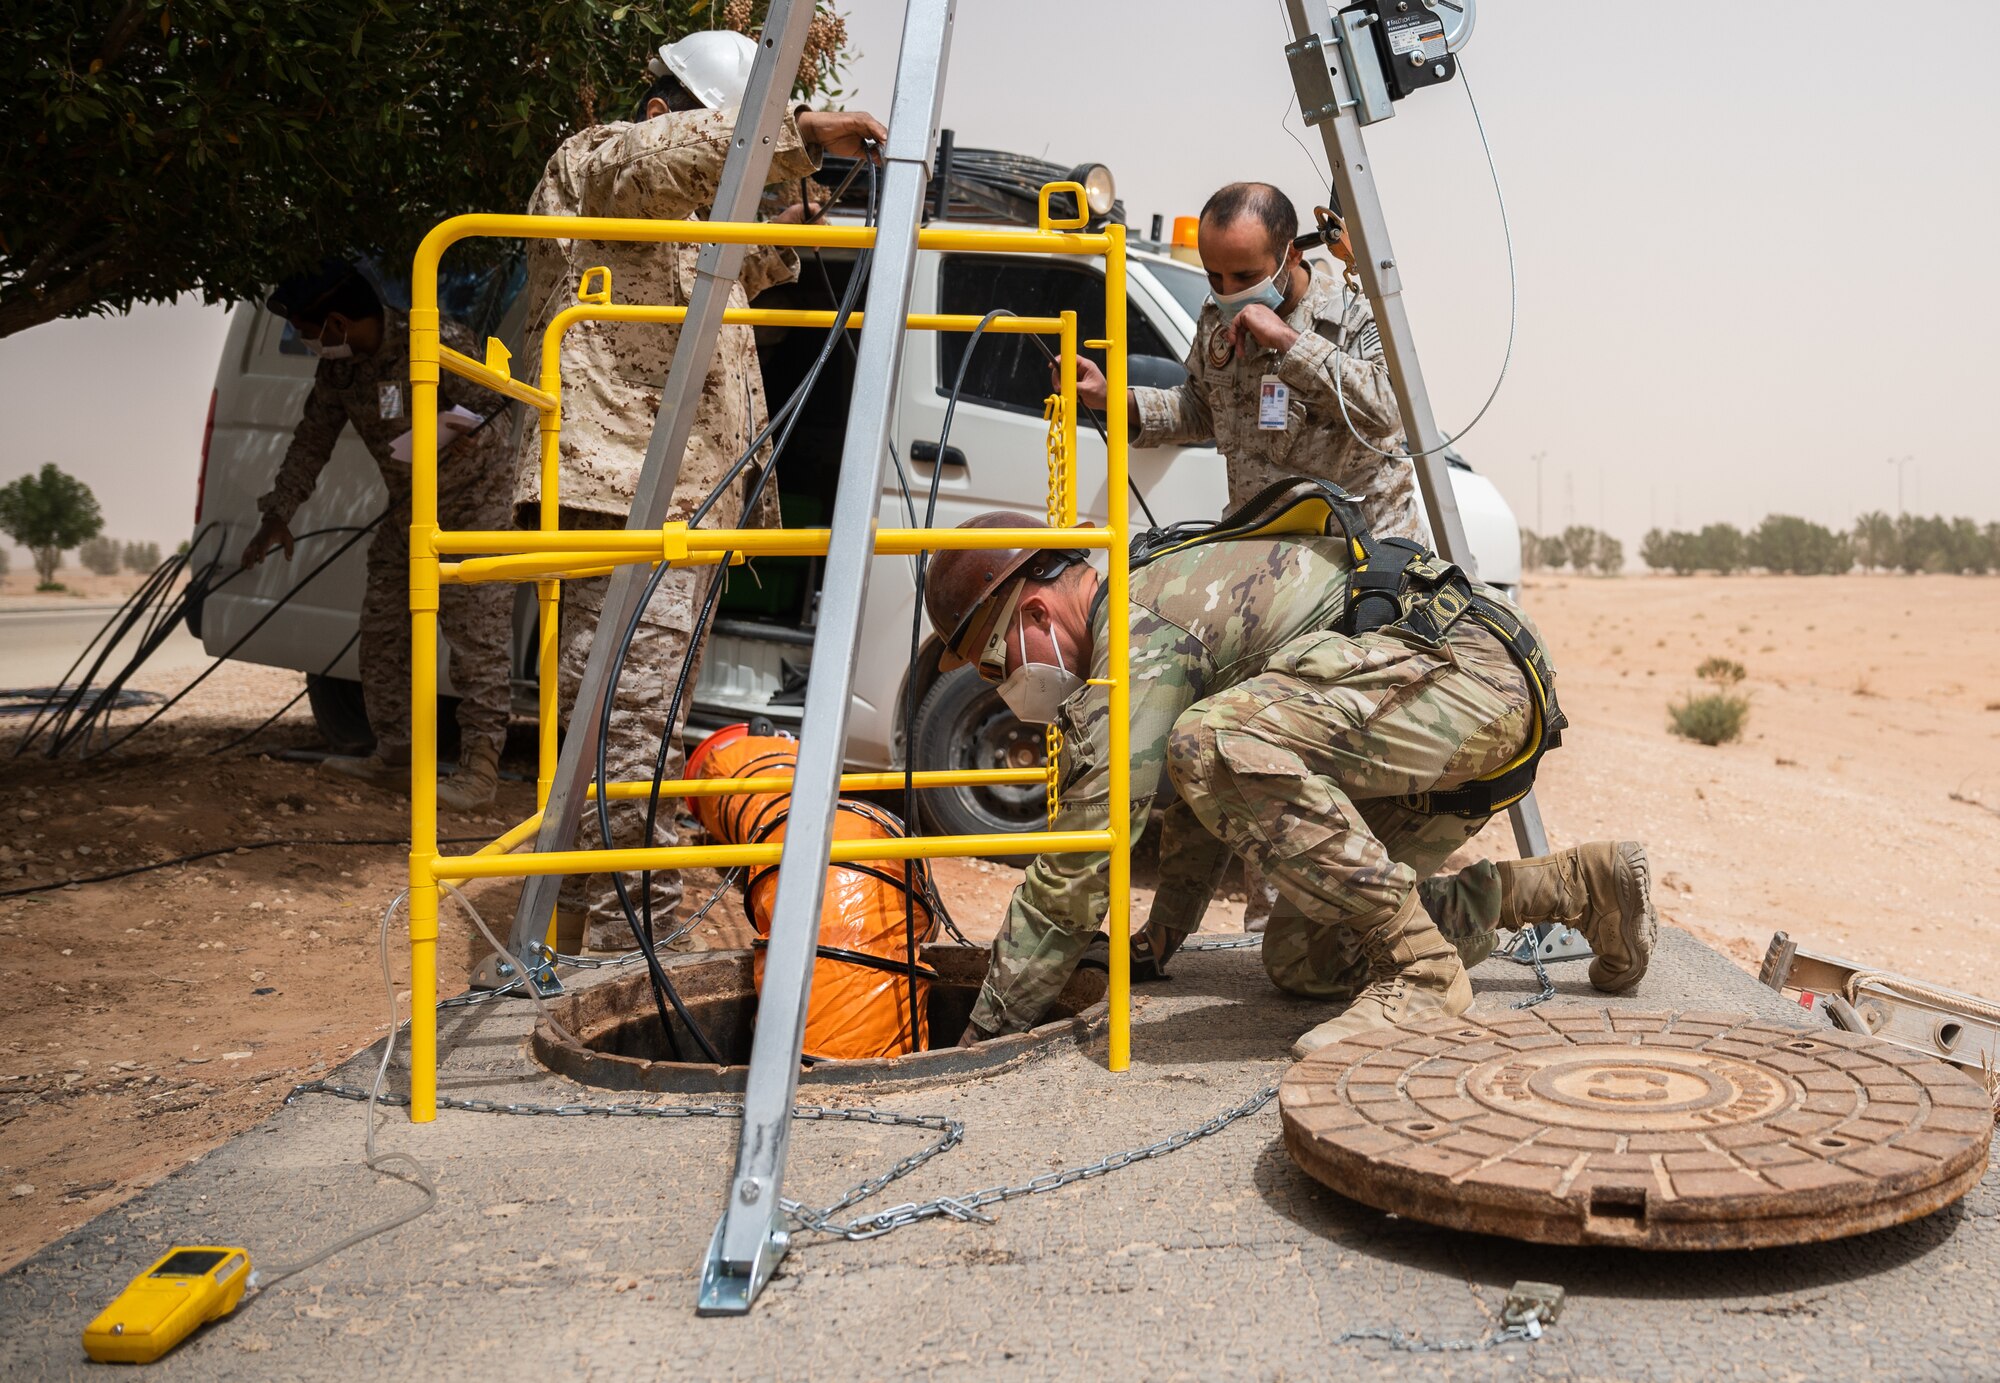 Service members from the U.S. and Royal Saudi Air Forces perform a fiber optic repair at Prince Sultan Air Base, Kingdom of Saudi Arabia, March 17, 2022. Training alongside RSAF partners contributes to developing the capabilities and skills of base personnel in operational and combat environments. (U.S. Air Force photo by Senior Airman Jacob B. Wrightsman)